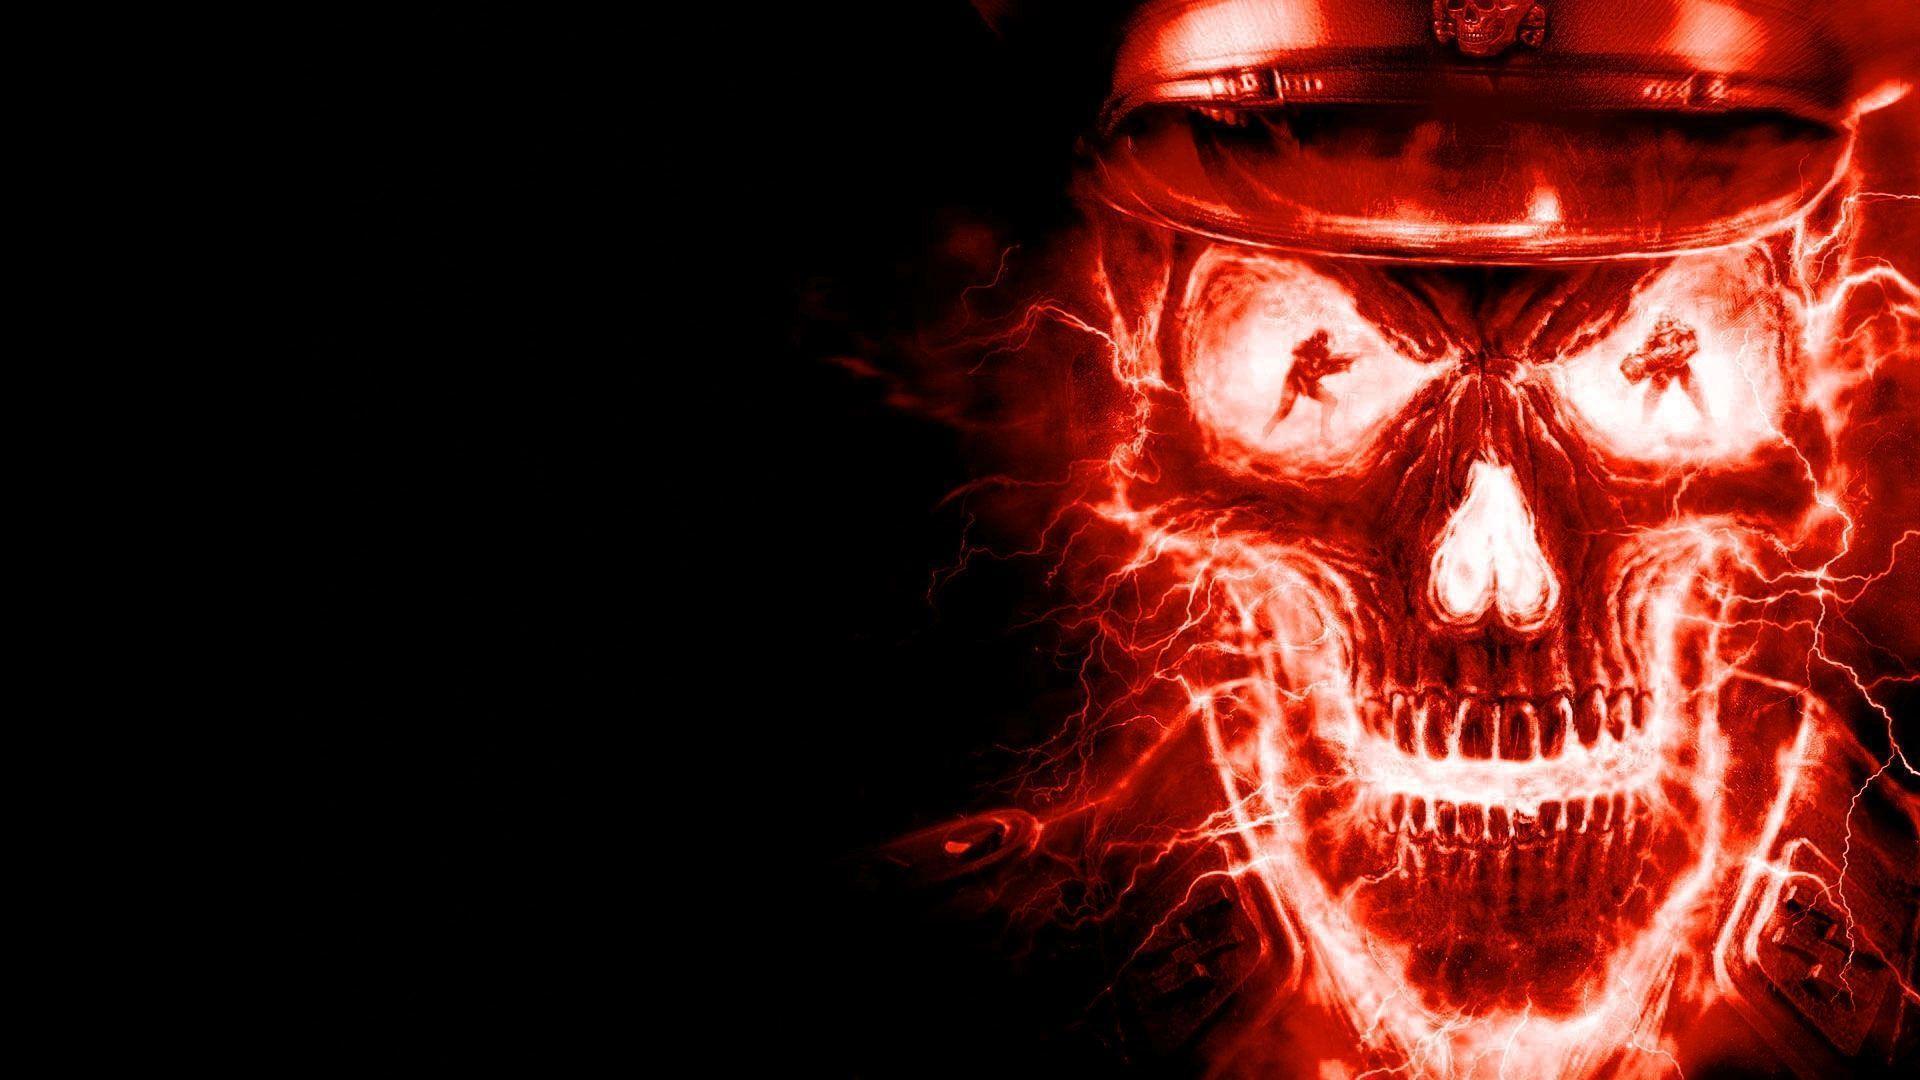 Cool Flaming Skull Wallpaper Image Amp Pictures Becuo